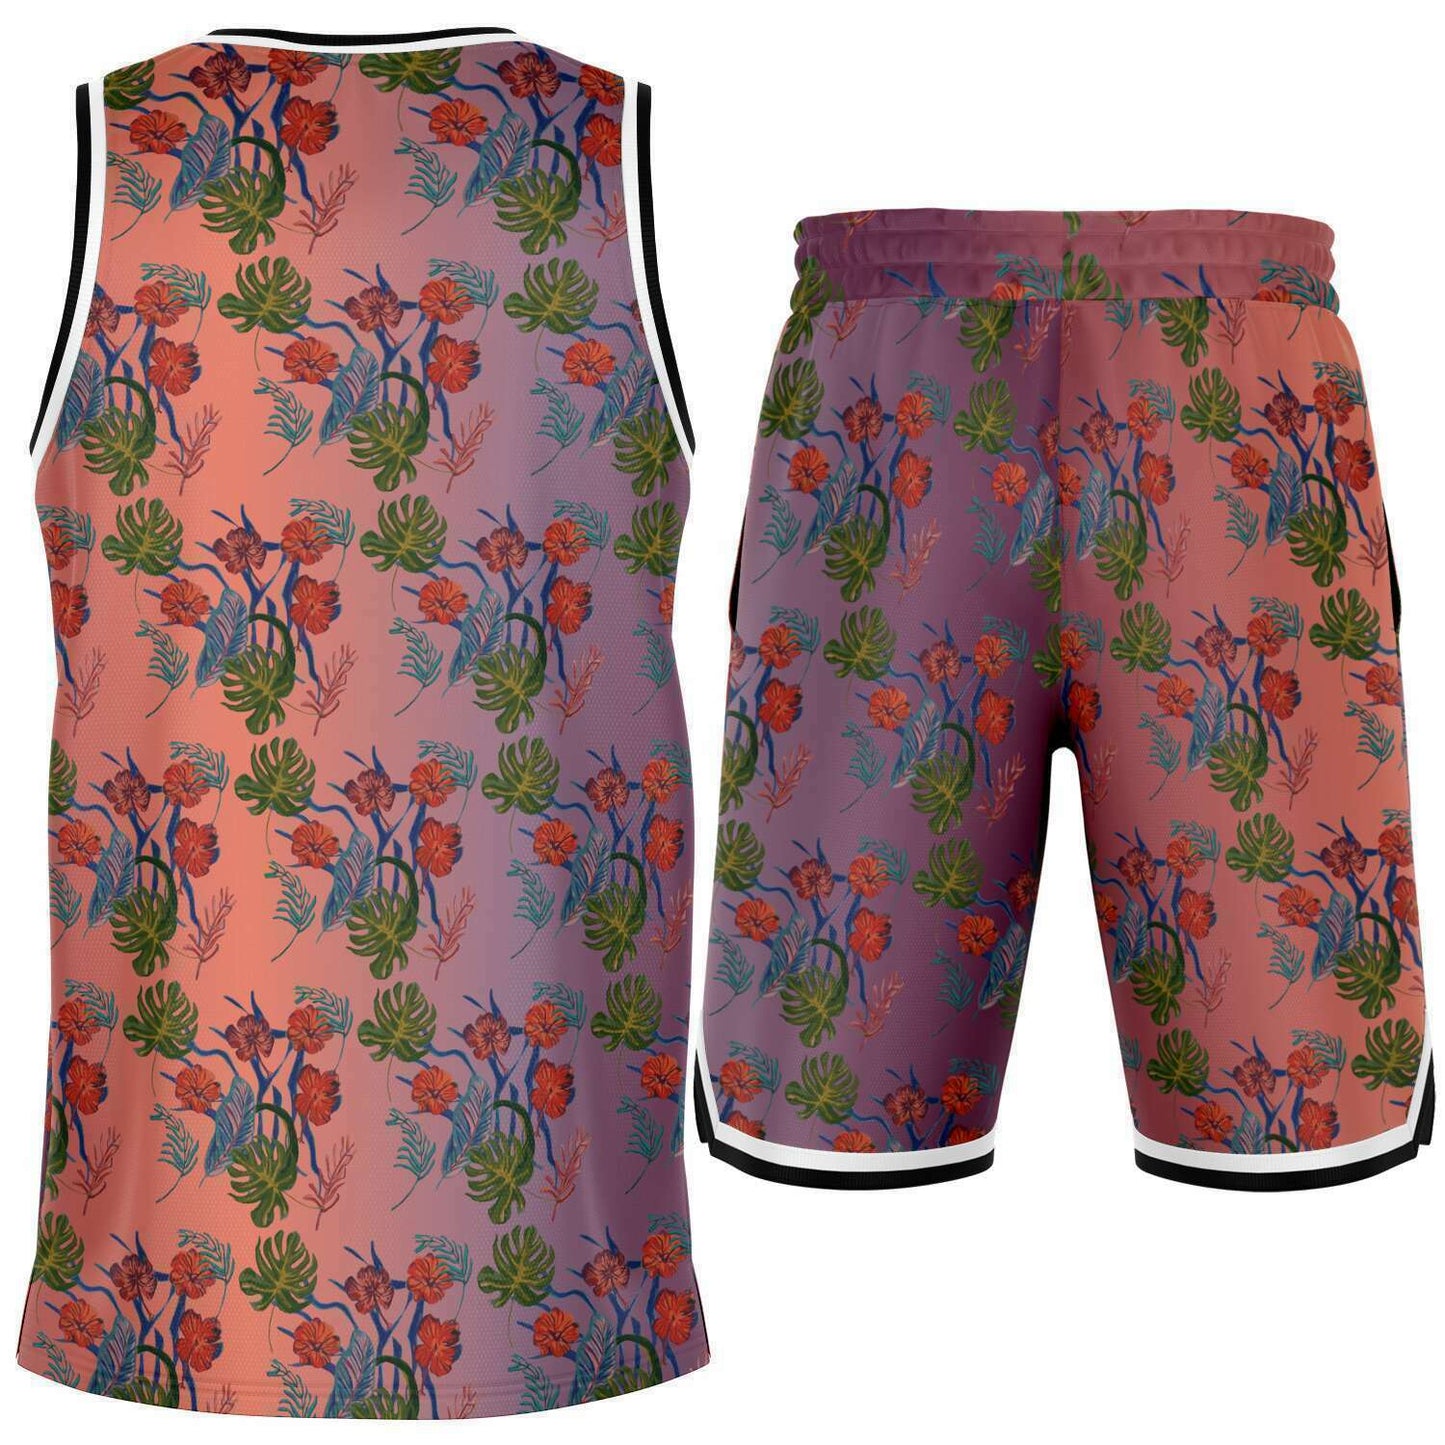 Tropical Floral Print Dawn Basketball Jersey and Shorts Set - HipHatter